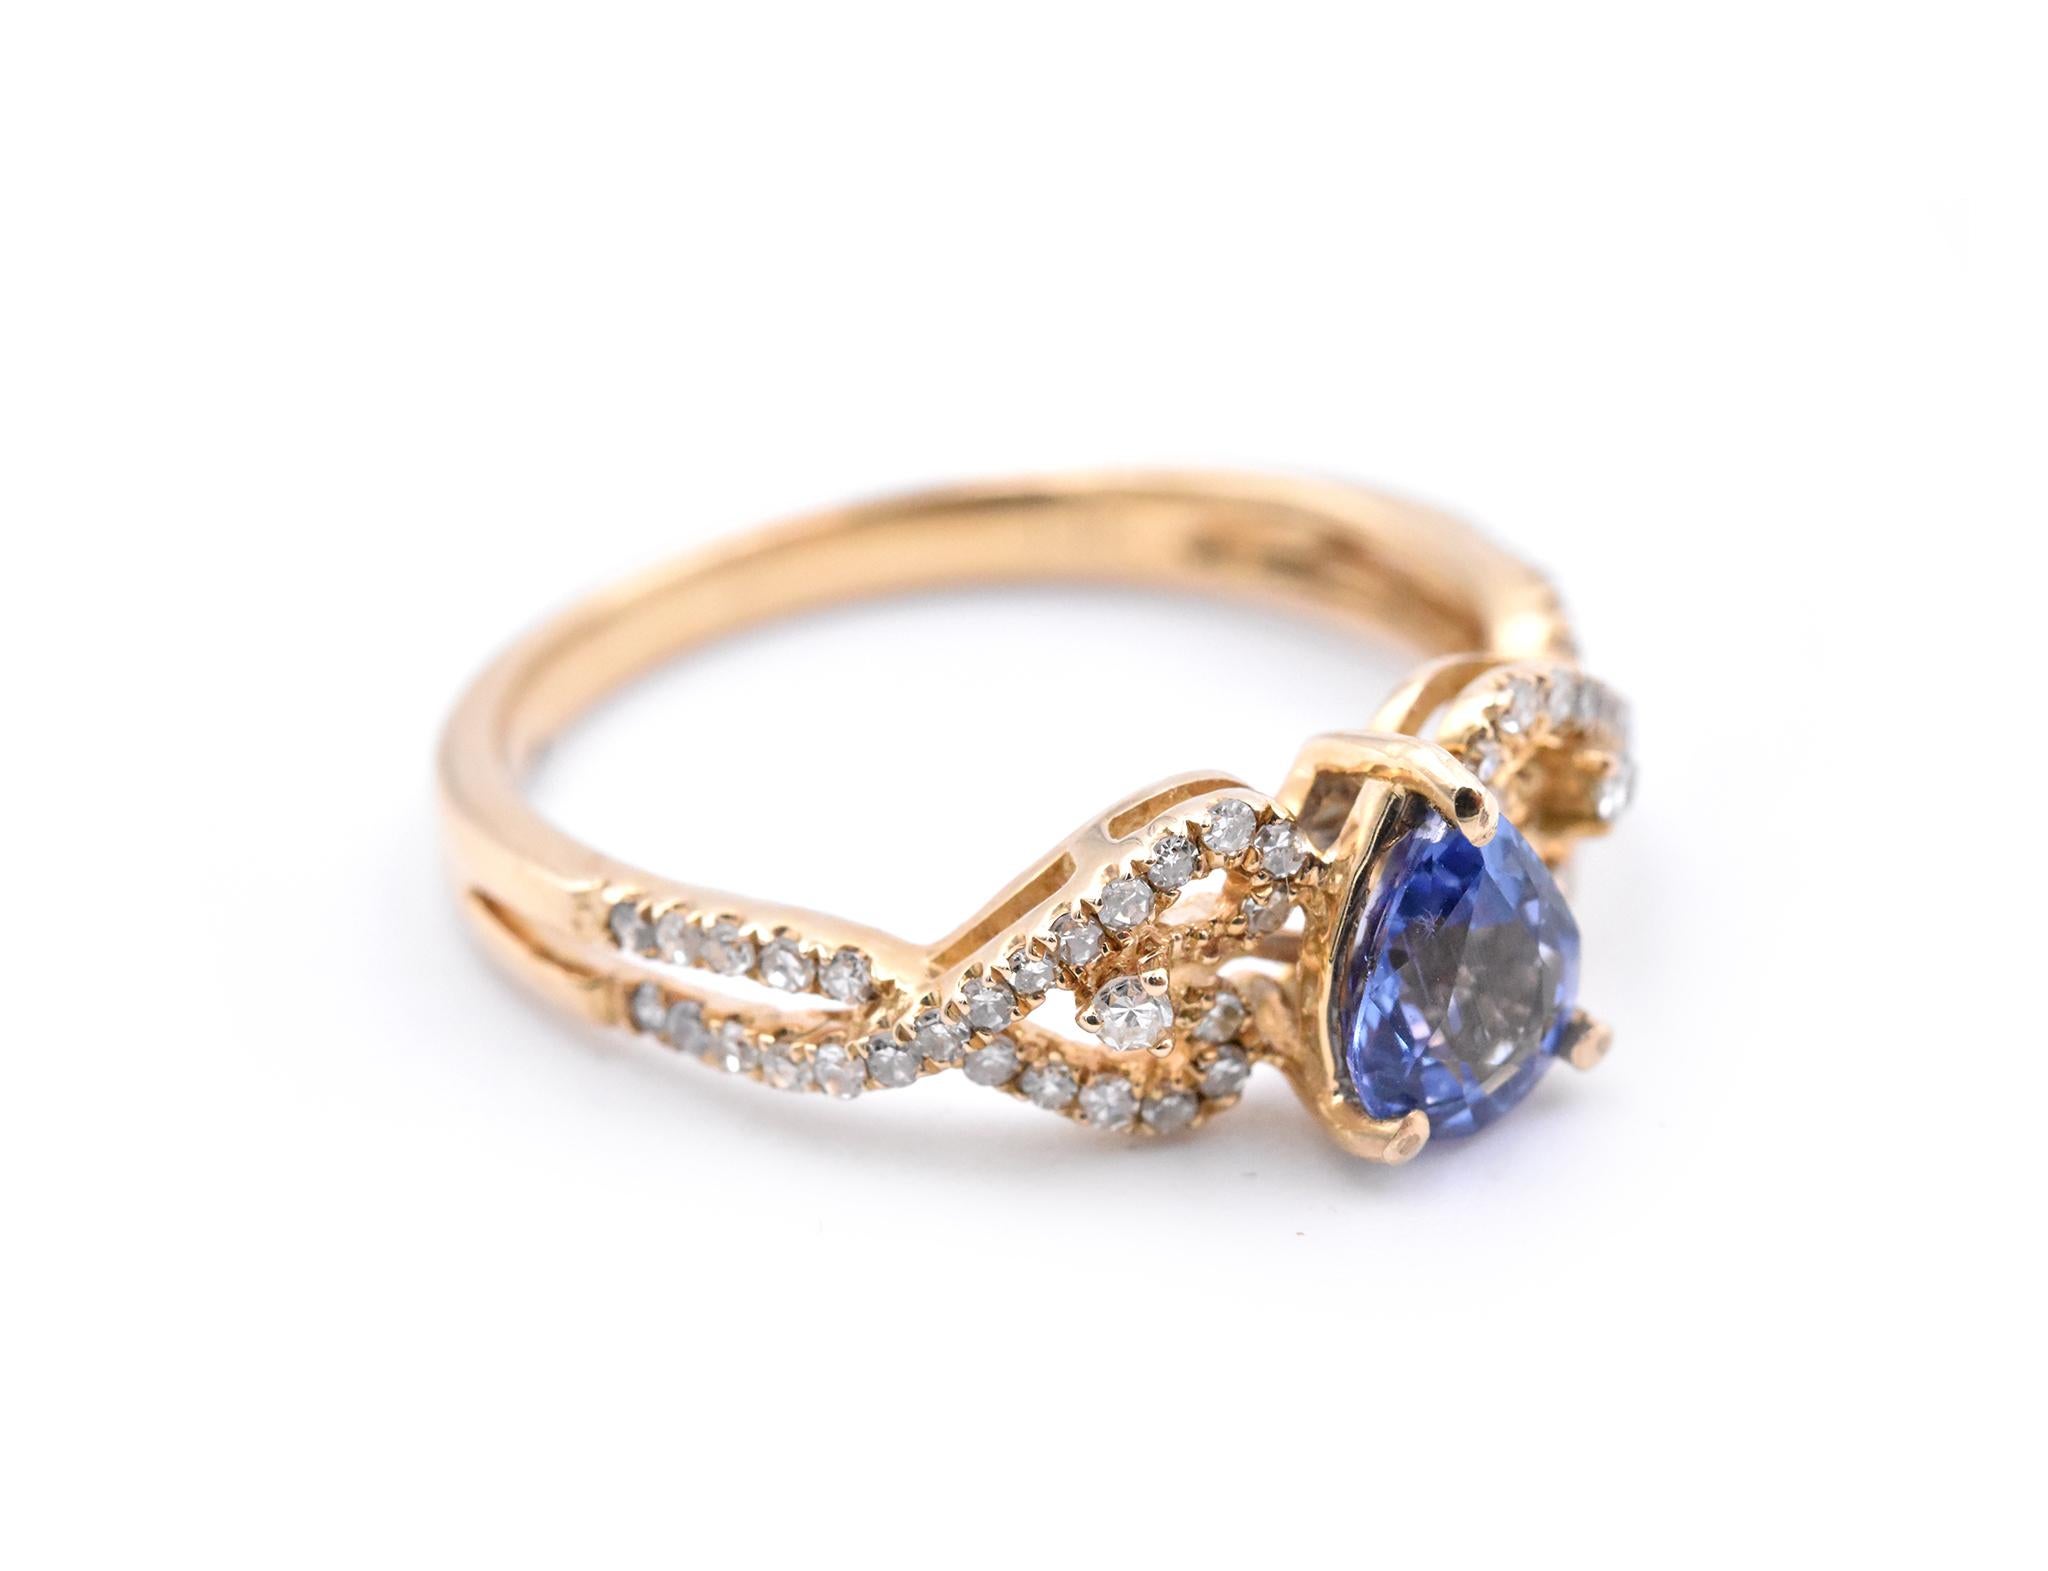 Material: 14k Yellow gold
Gemstones: Tanzanite = .35ct Pear Cut
Certification: AGI 26002
Diamonds: 54 round brilliant cuts = .31cttw
Color: G
Clarity: VS-SI
Ring Size: 7.5 (please allow two additional shipping days for sizing requests)
Dimensions: